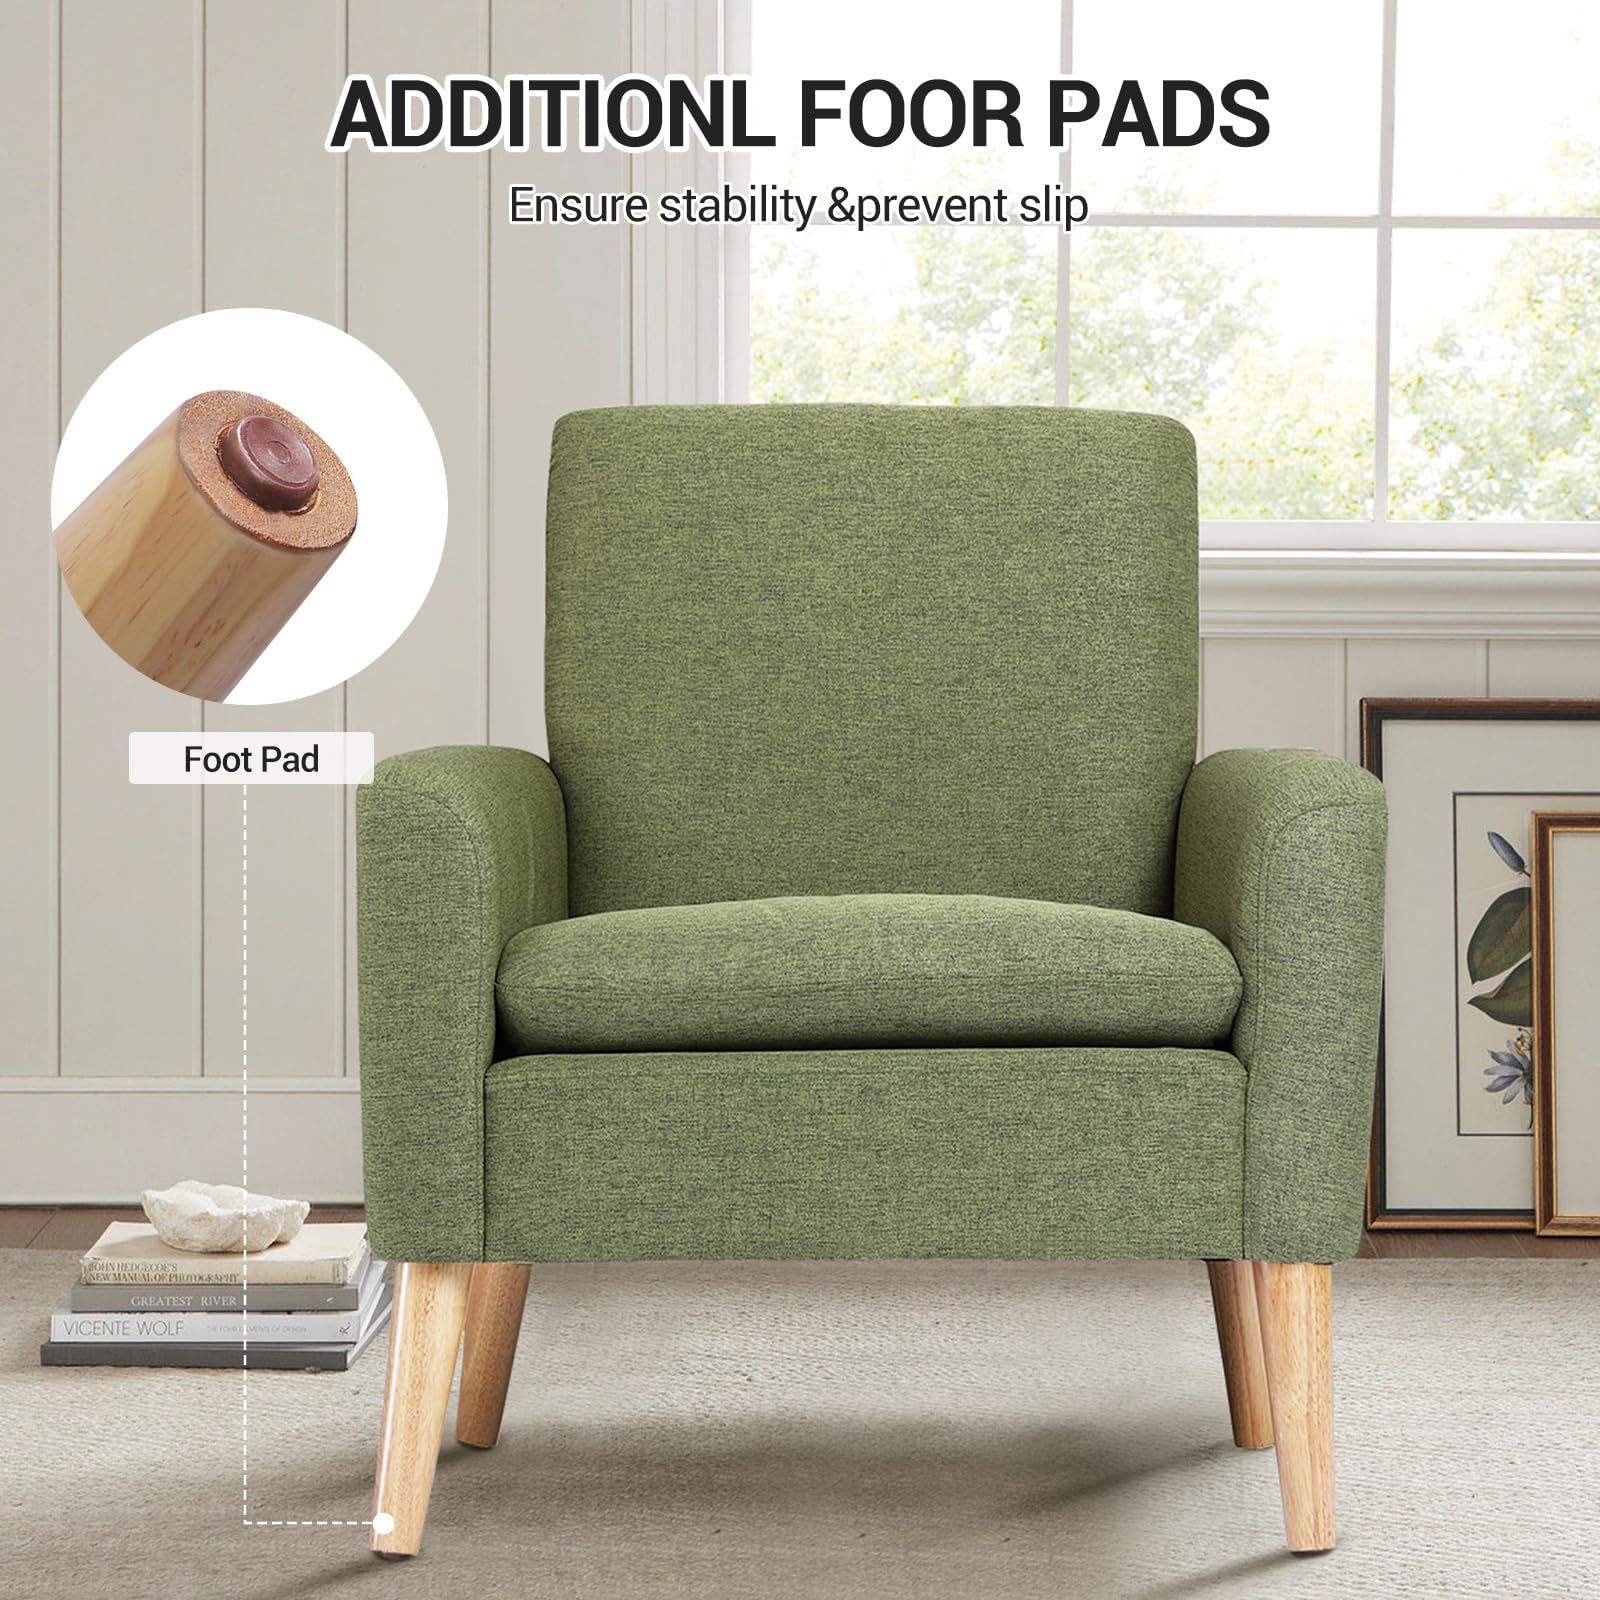 Lohoms Mid-Century Modern Fabric Accent Chair Single Sofa Comfy Upholstered Arm Chair Living Room Furniture (Green)